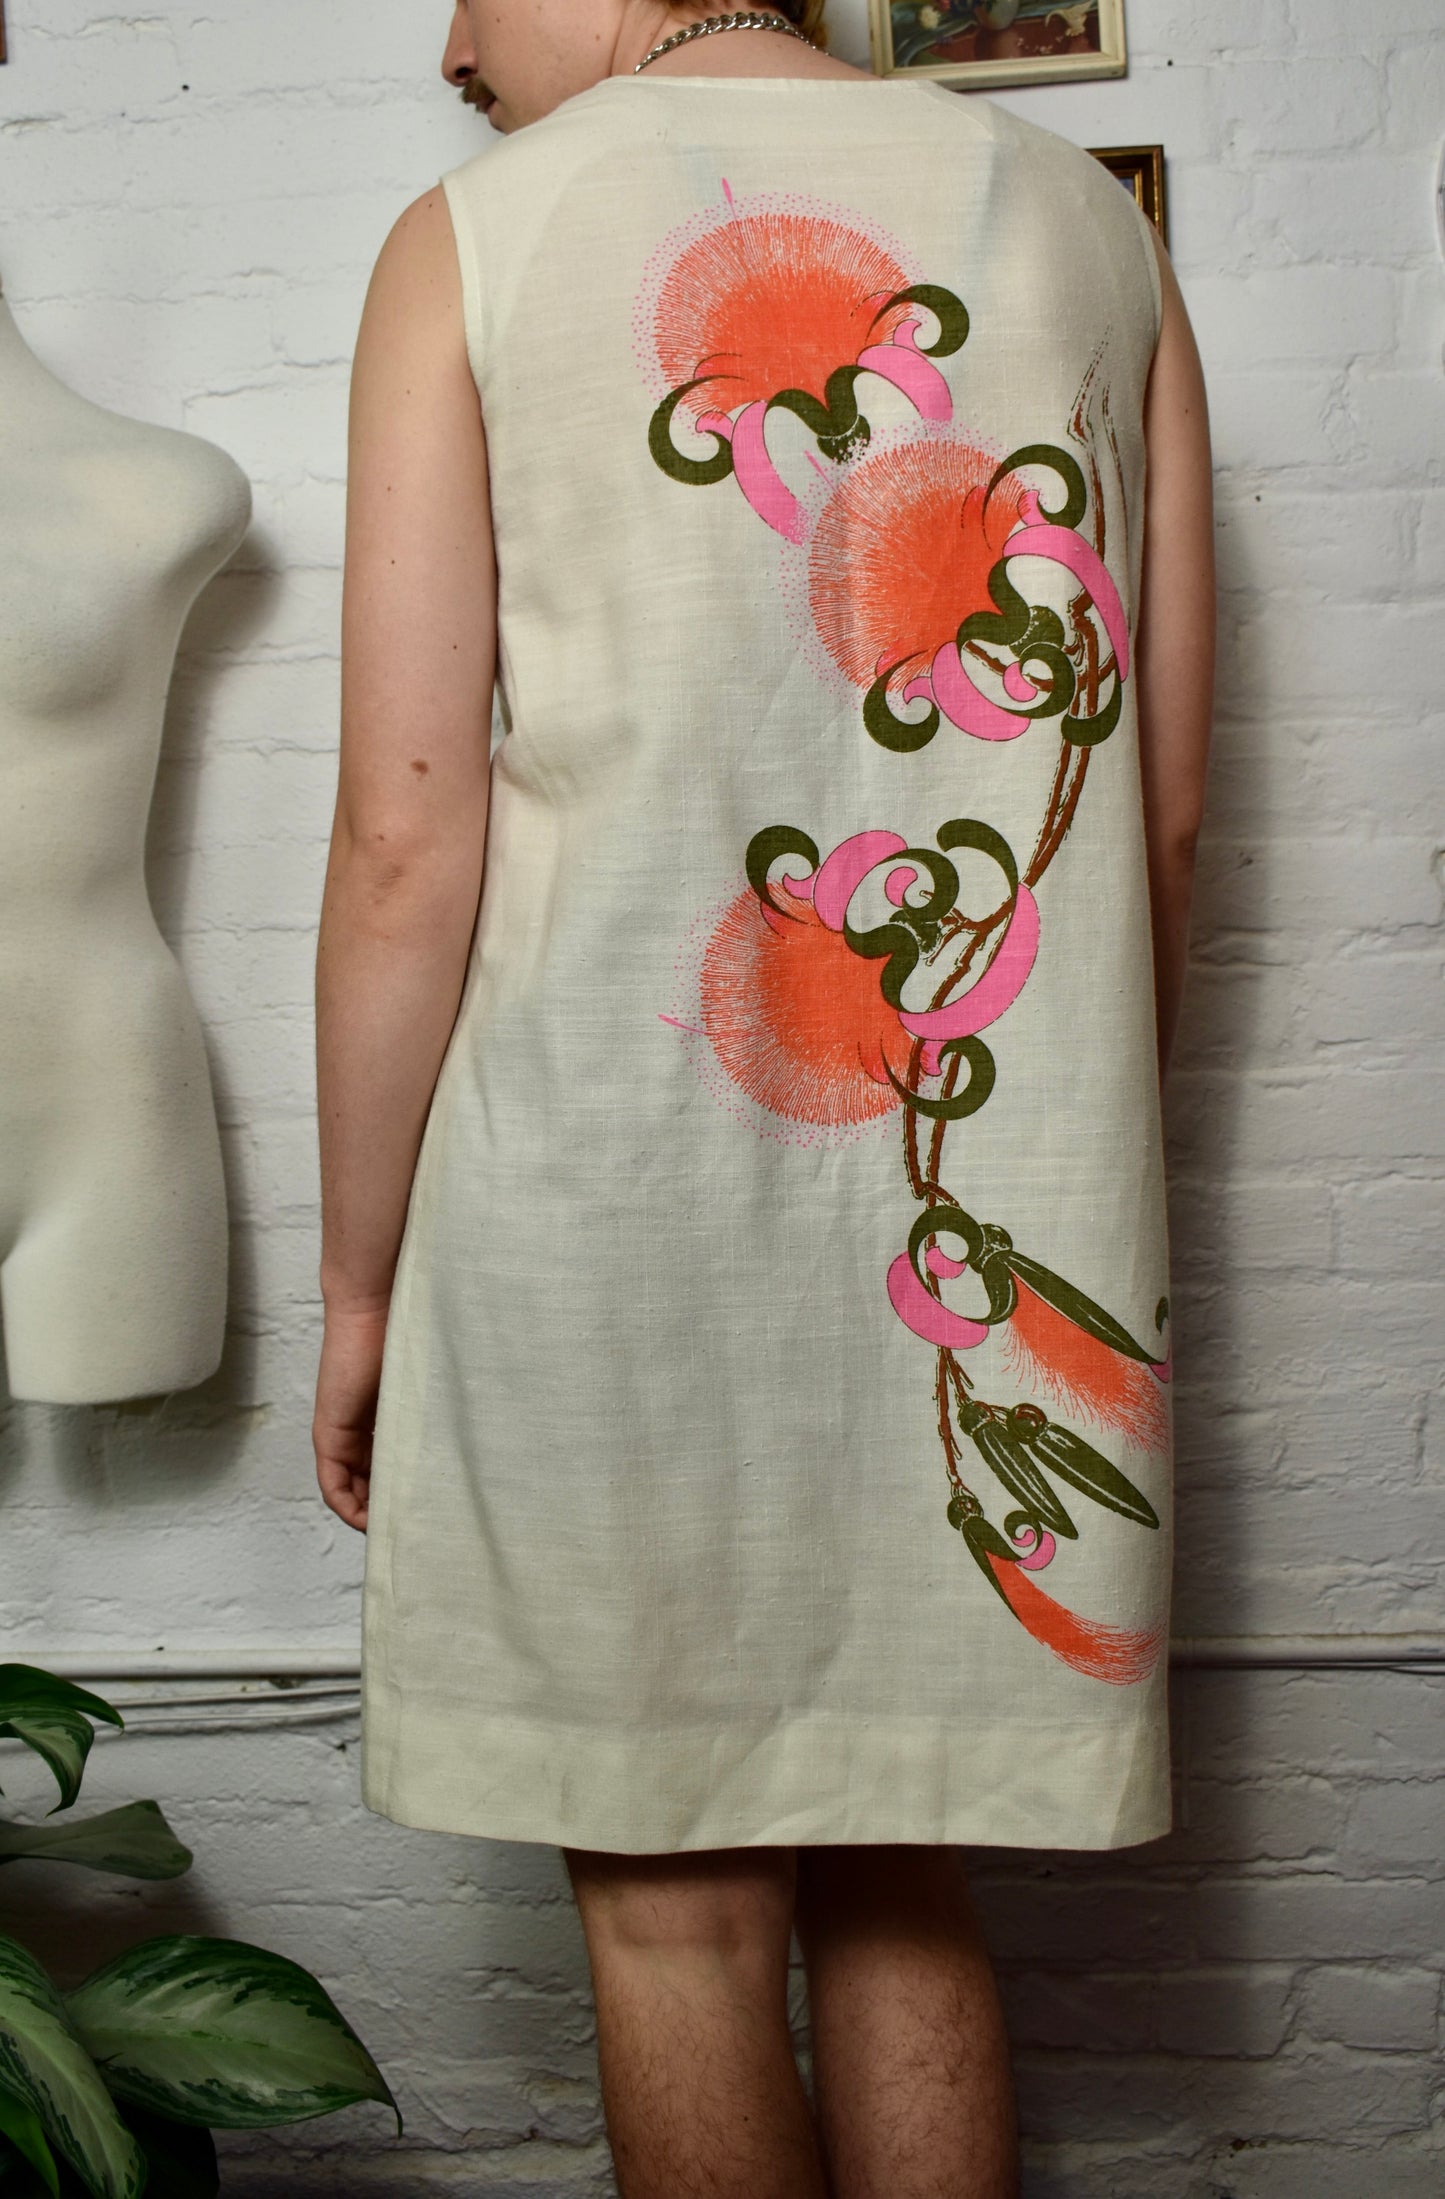 Vintage 60s "Shaheen" Sleeveless Psychedelic Dress